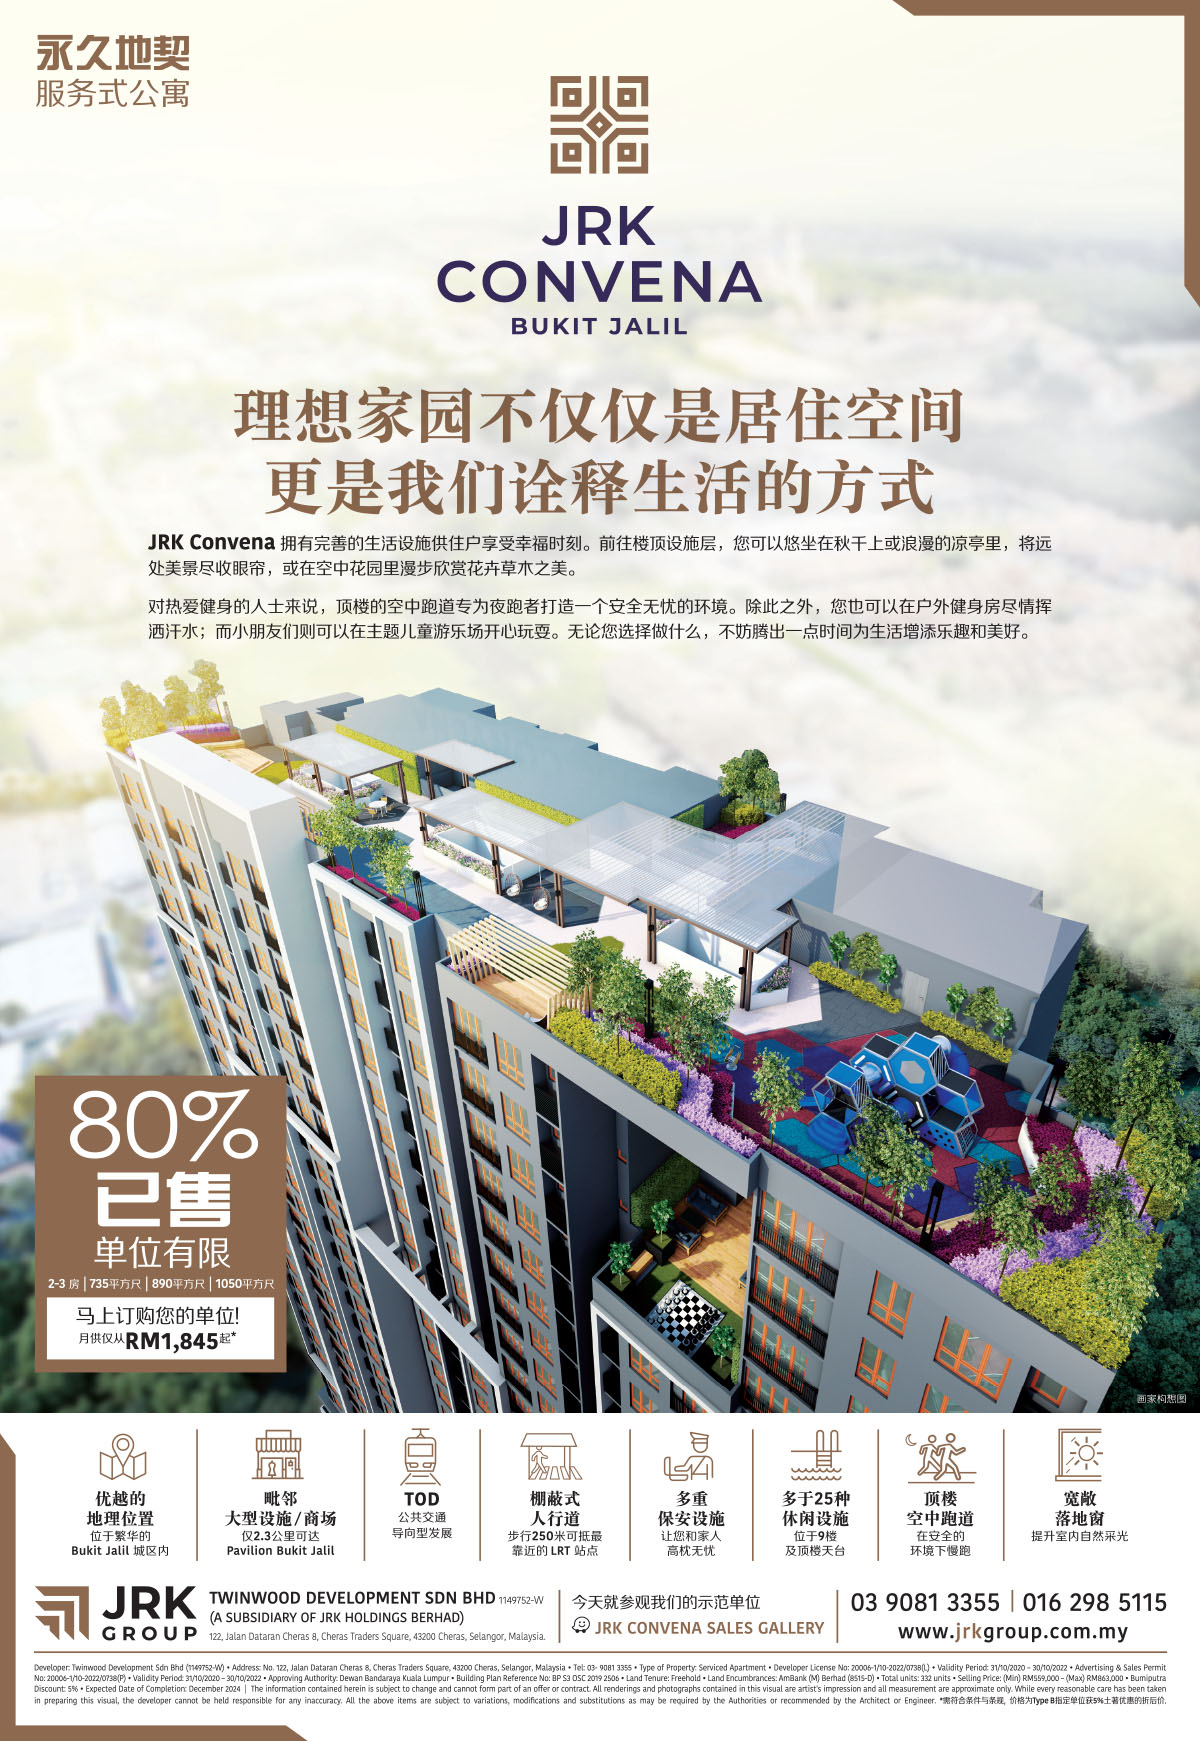 JRK Convena Bukit Jalil. More than just a home... it's a way of life